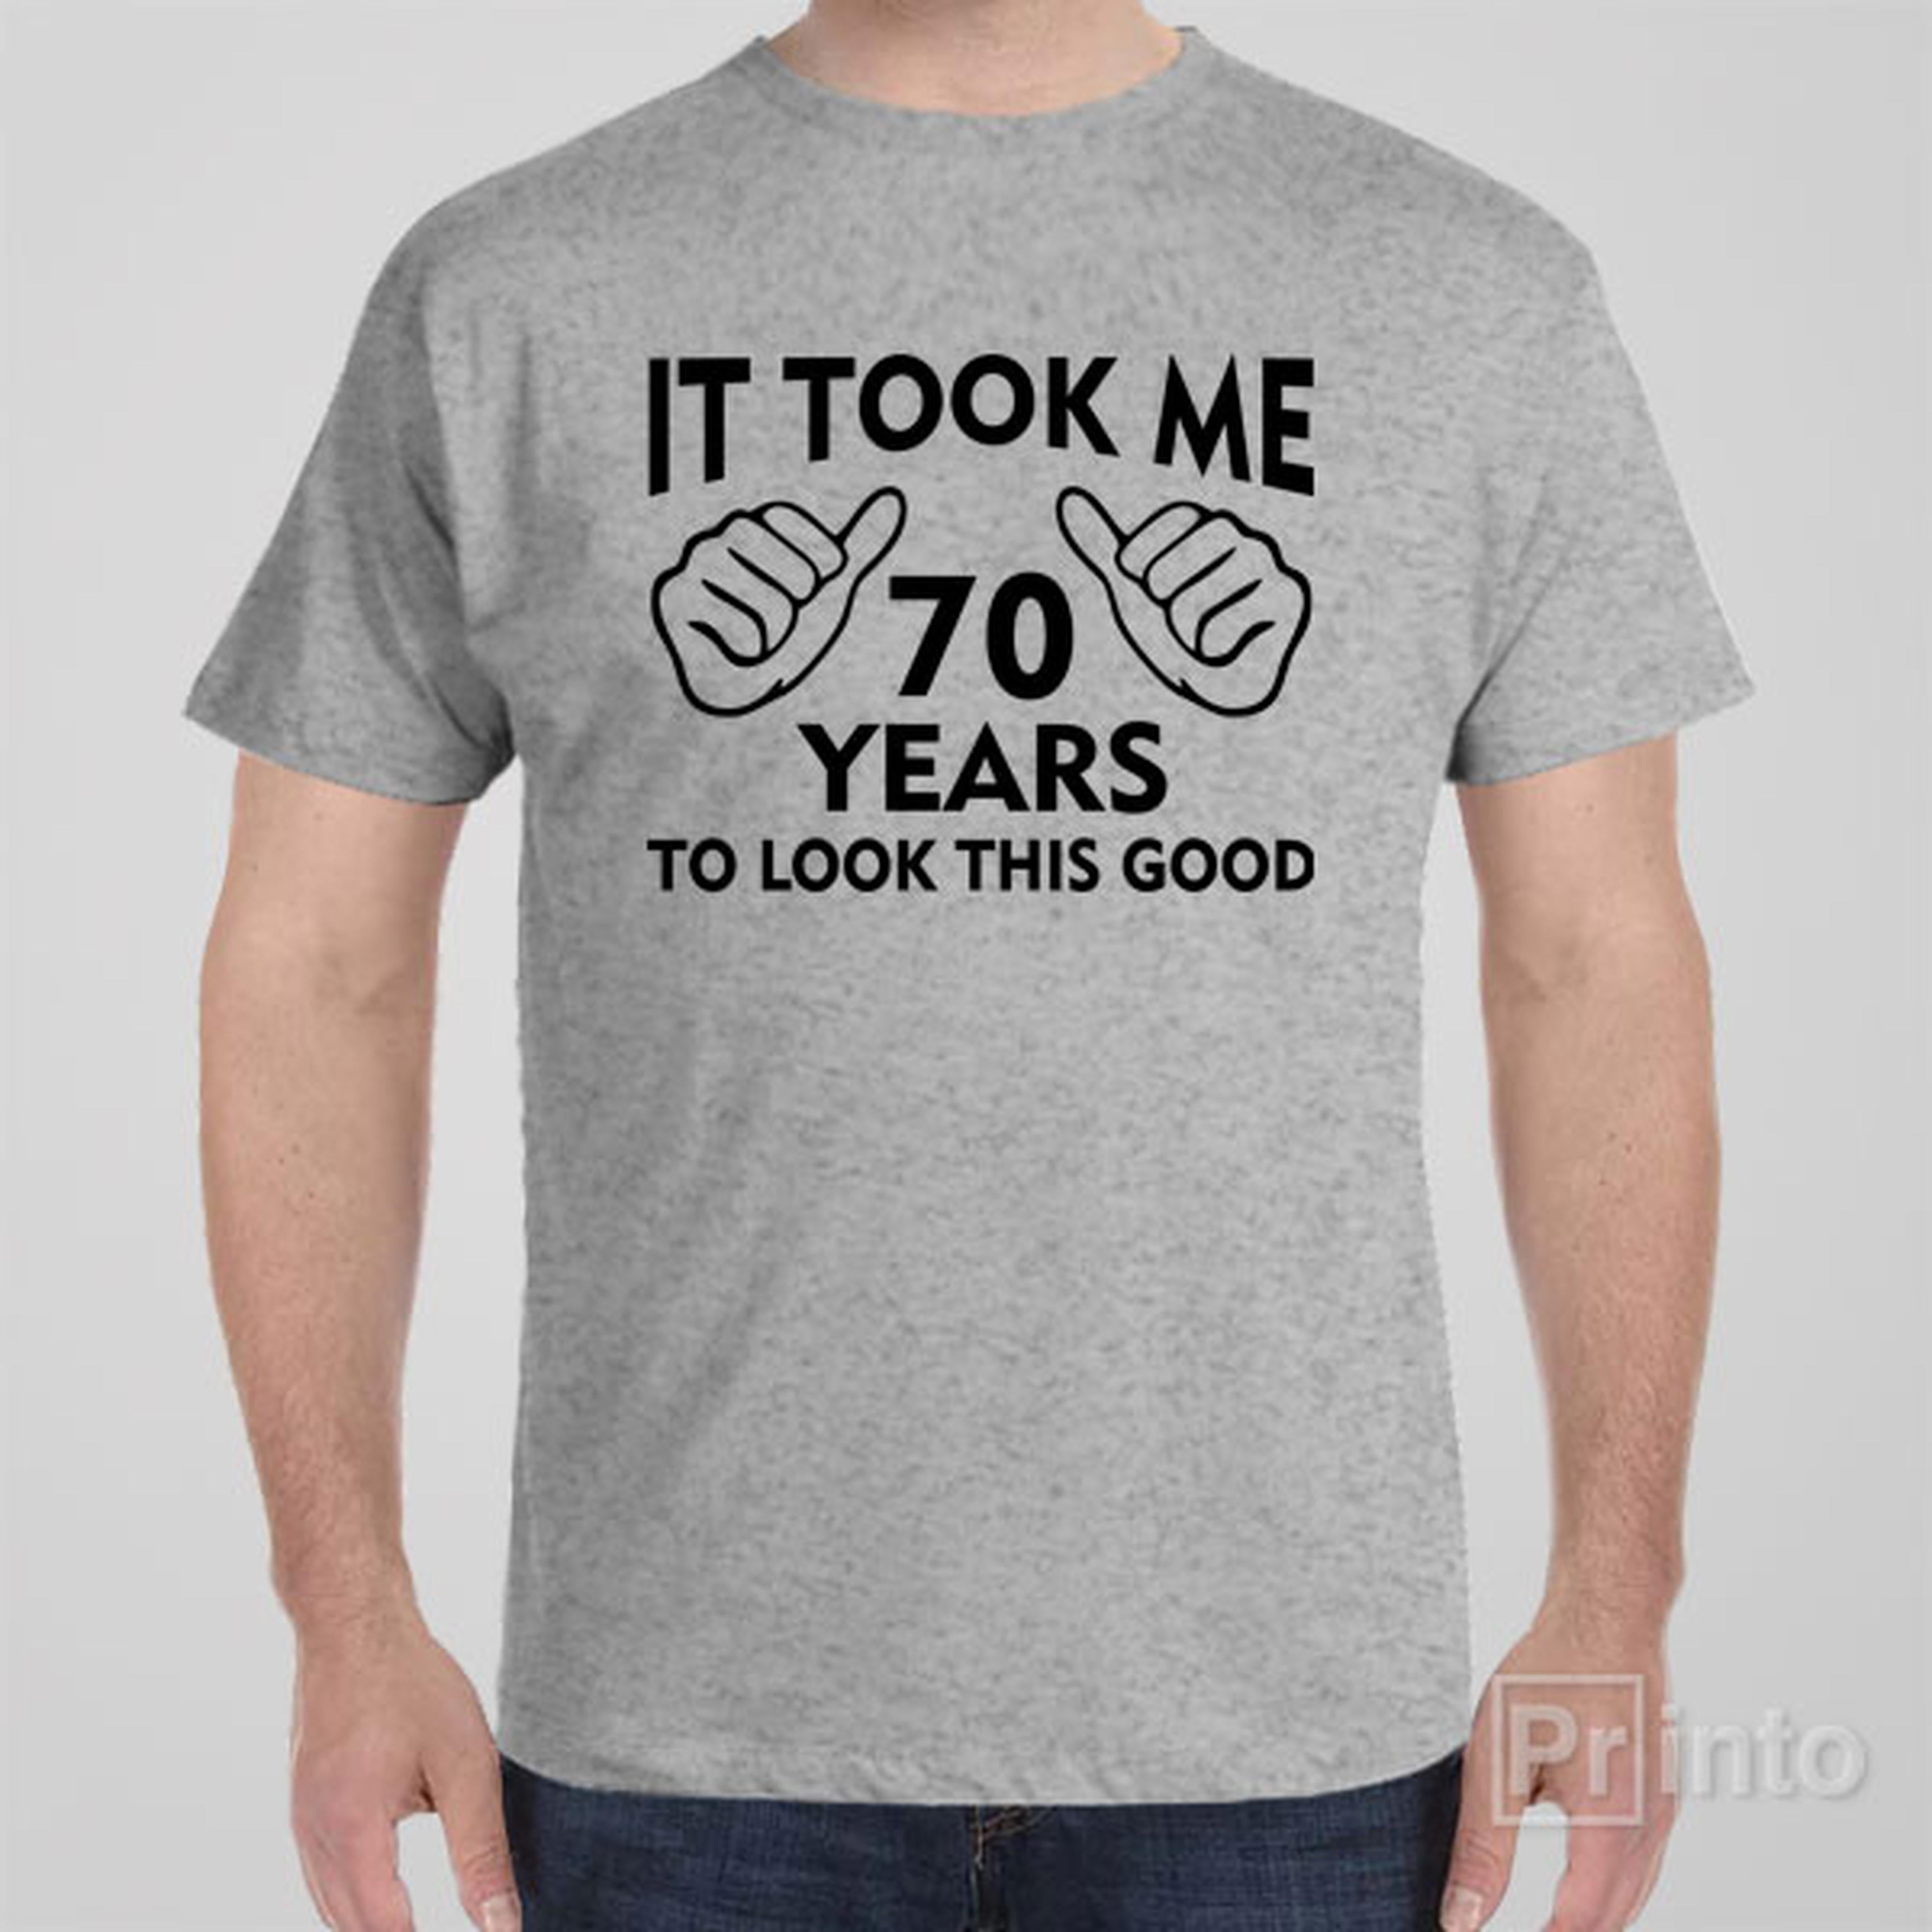 it-took-me-70-years-to-look-this-good-t-shirt